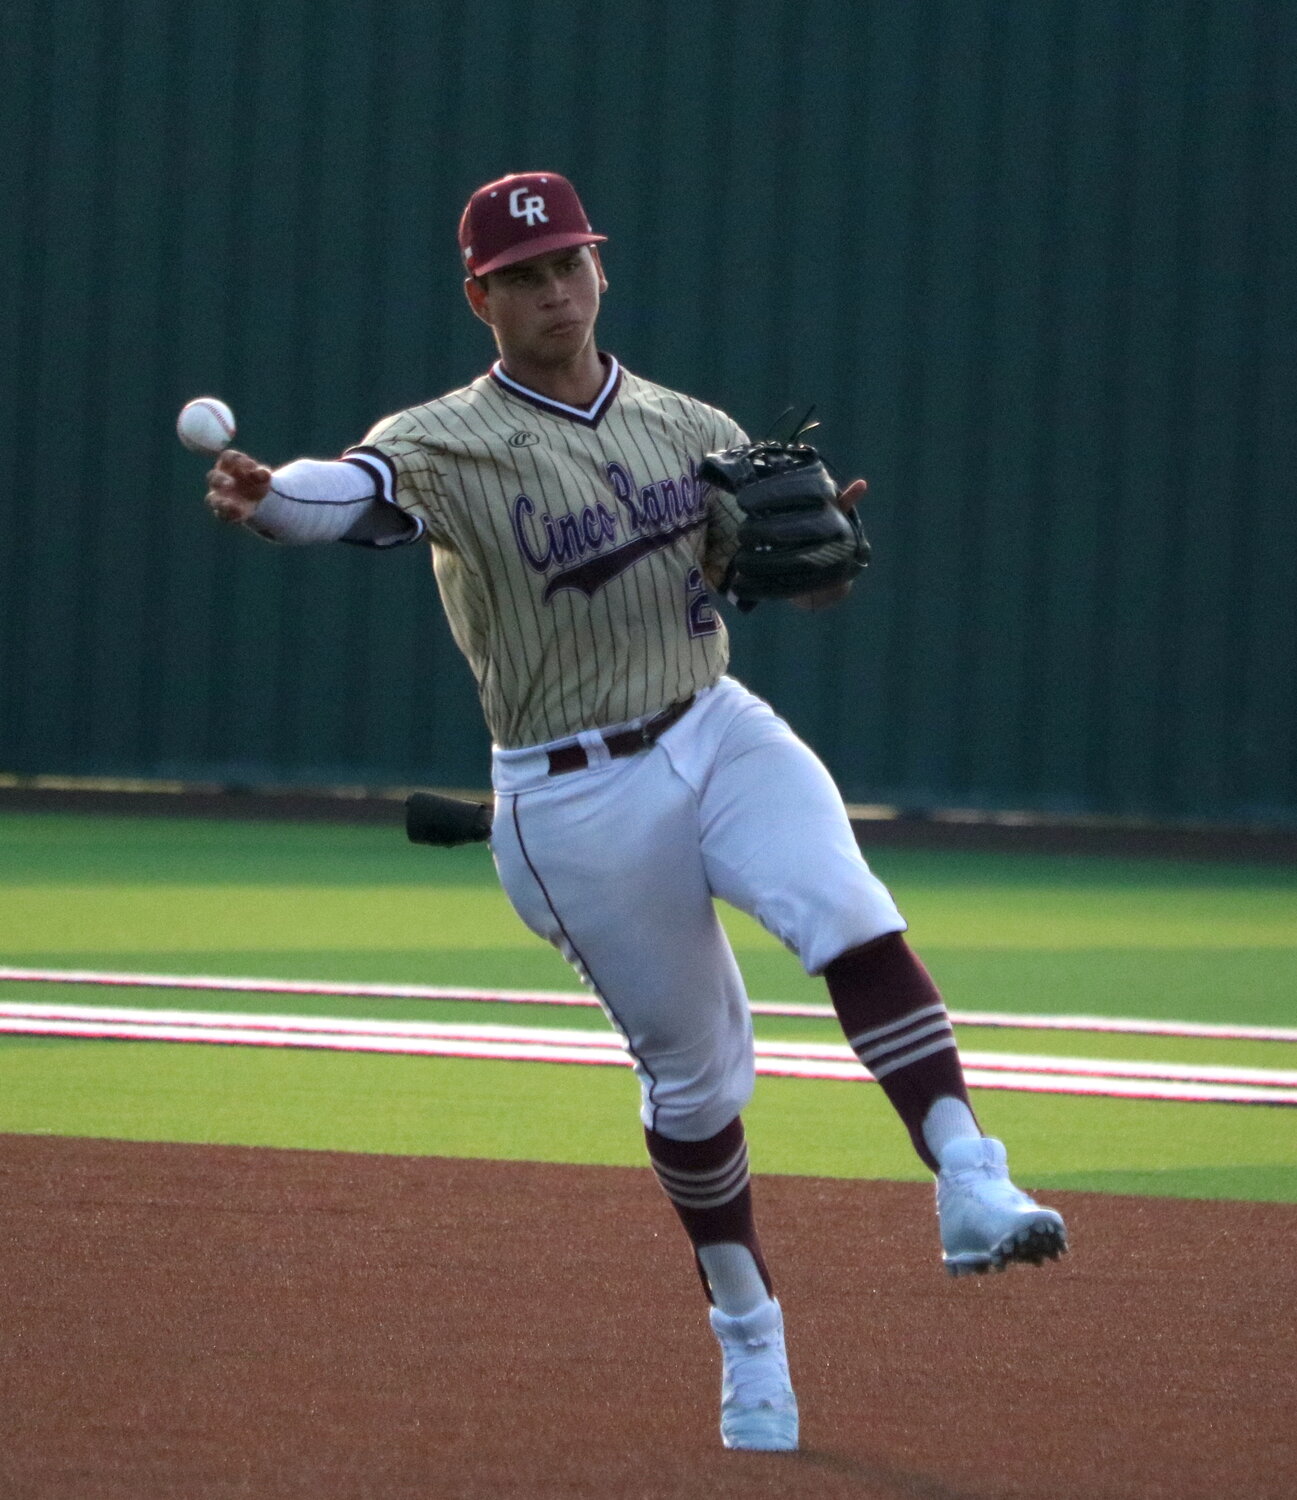 Rainer Castillo makes a throw to first base during Friday's Regional Quarterfinal between Cinco Ranch and Ridge Point at Langham Creek.